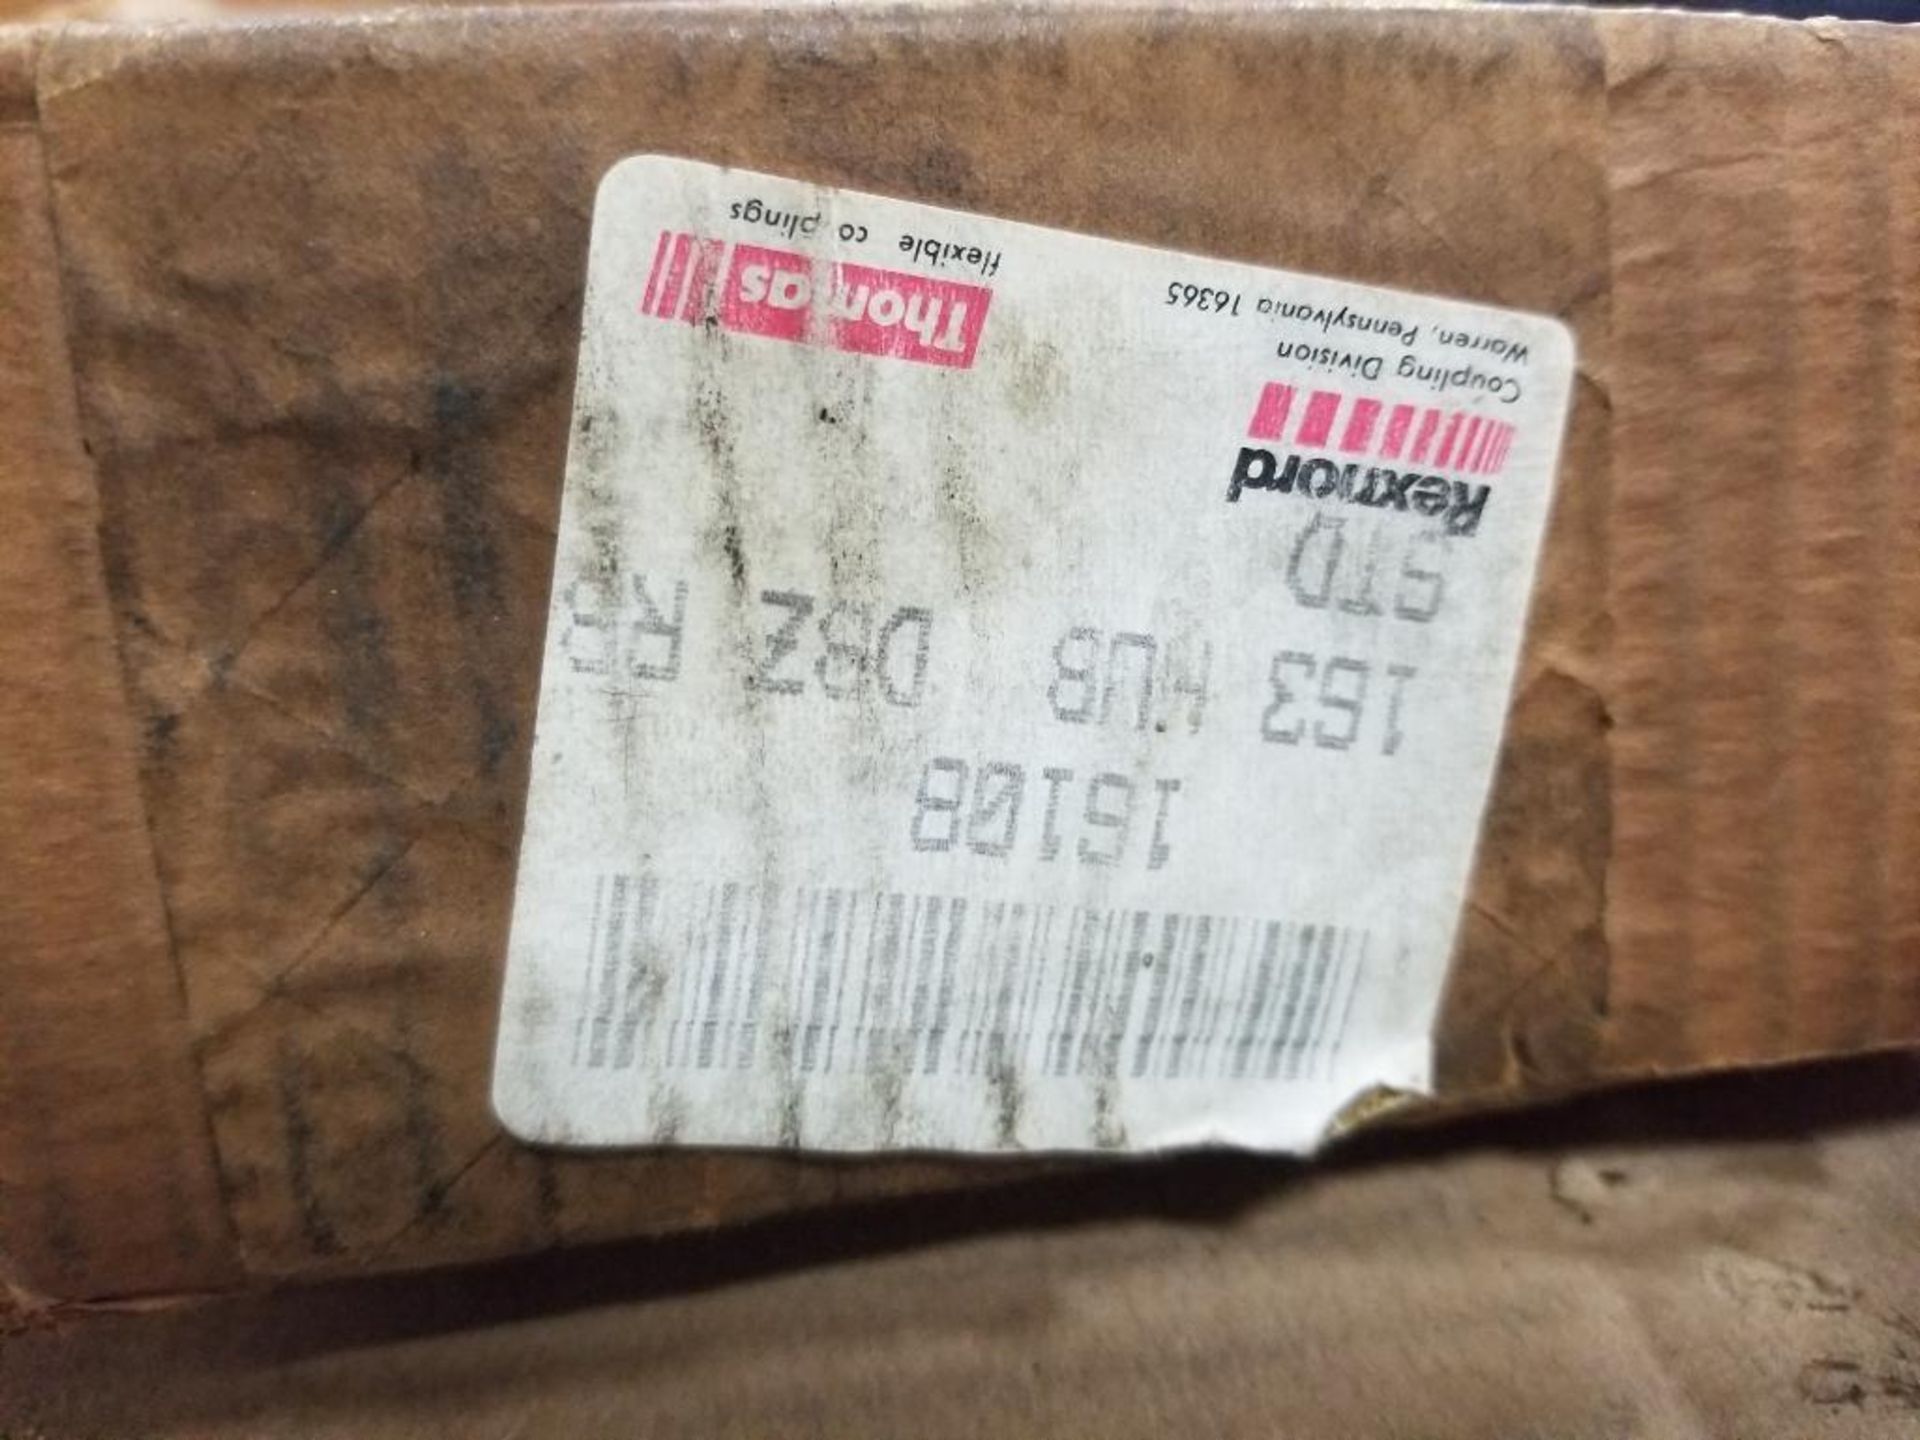 Qty 3 - Assorted gear coupling sleeve assembly. Waldron, Rexnord. New in box. - Image 2 of 4